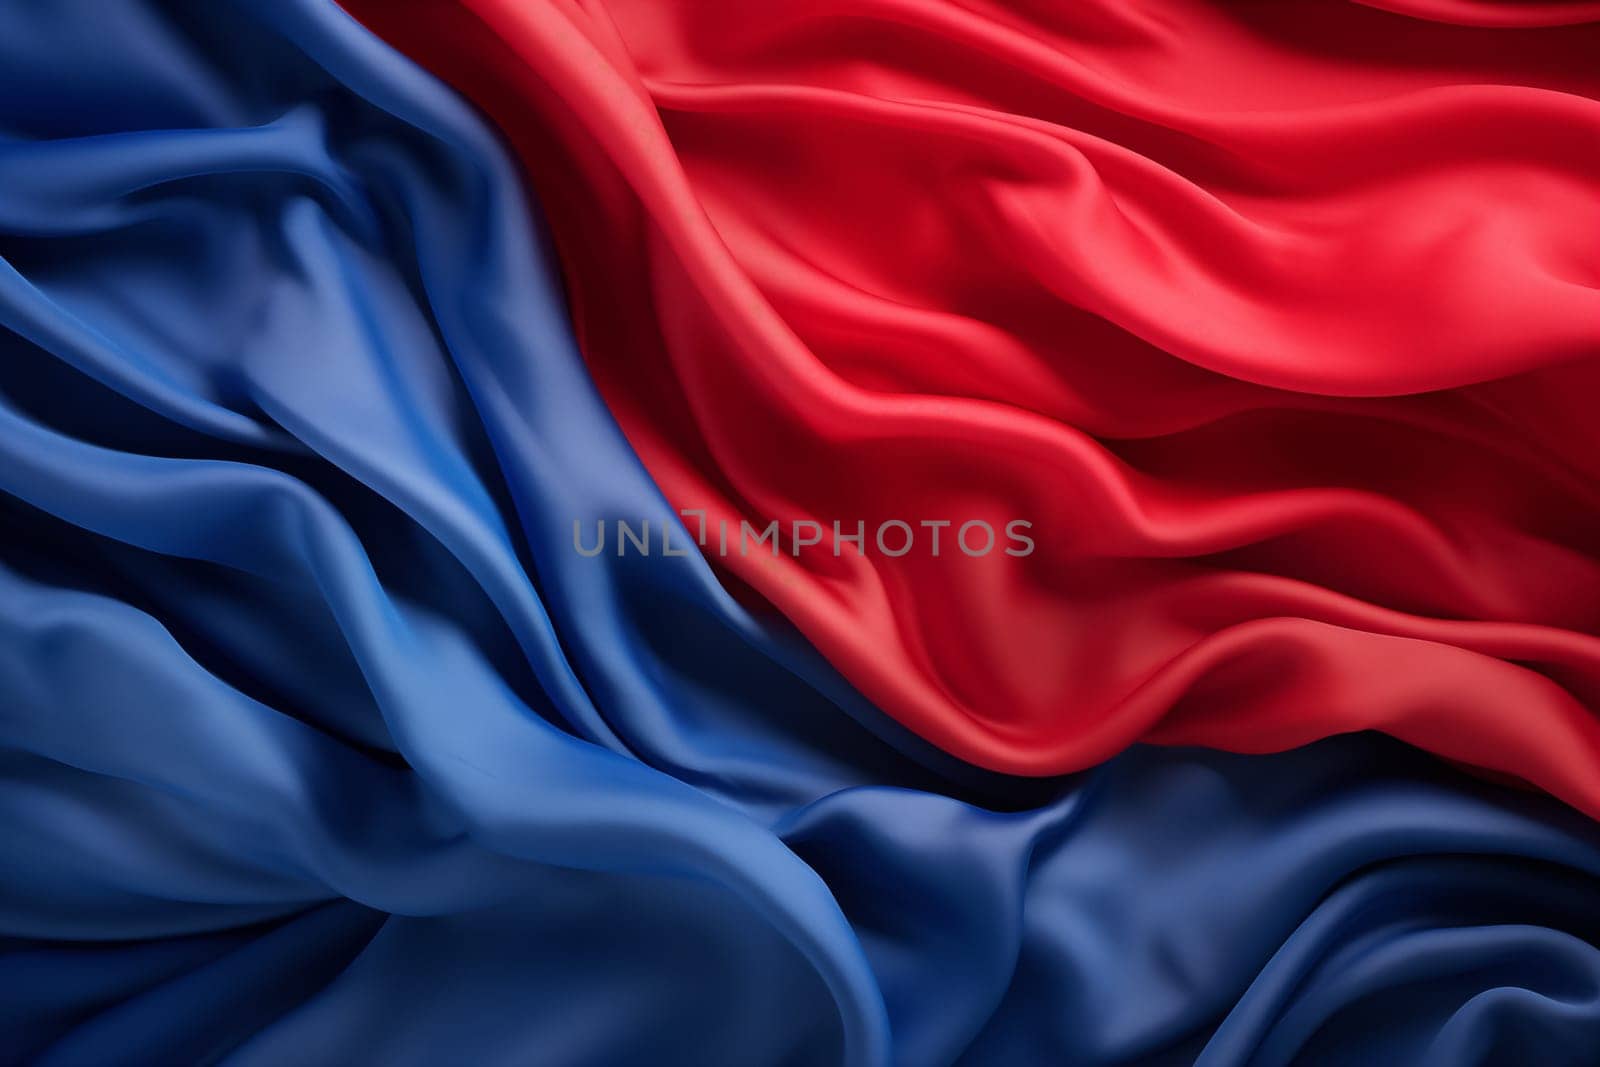 A colorful background with a red and blue fabric. High quality photo